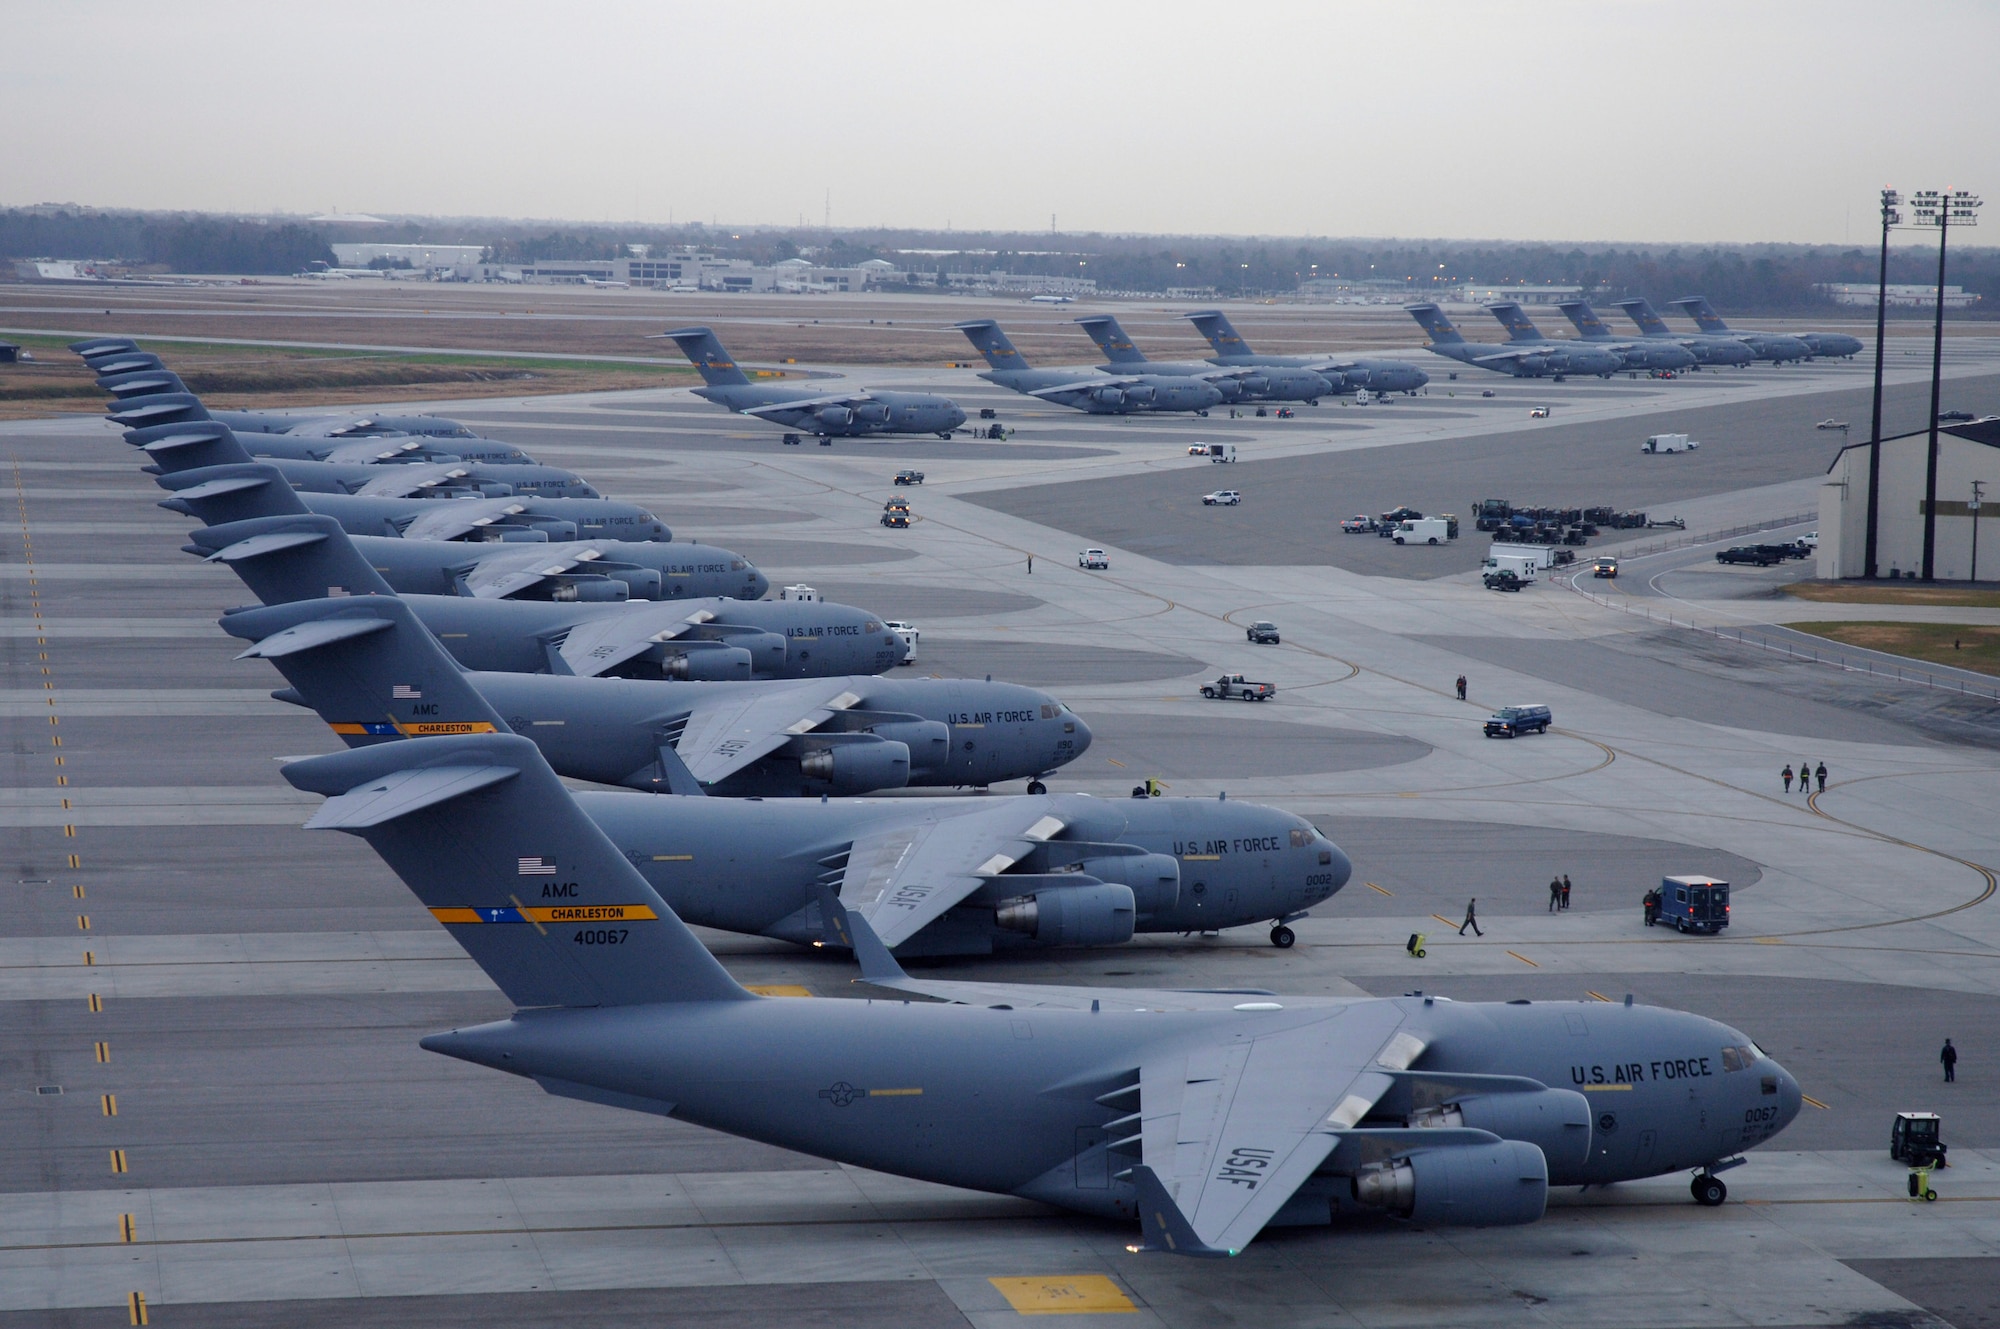 A line of C-17 Globemaster III's are parked on the runway Dec. 21 at Charleston Air Force Base, S.C. The C-17 is capable of rapid, strategic delivery of troops and all types of cargo. The design of the aircraft allows it to operate on small, austere airfields. It can take off and land on runways as short as 3,500 feet and 90 feet wide. (U.S. Air Force photo/Staff Sgt. April Quintanilla) 
